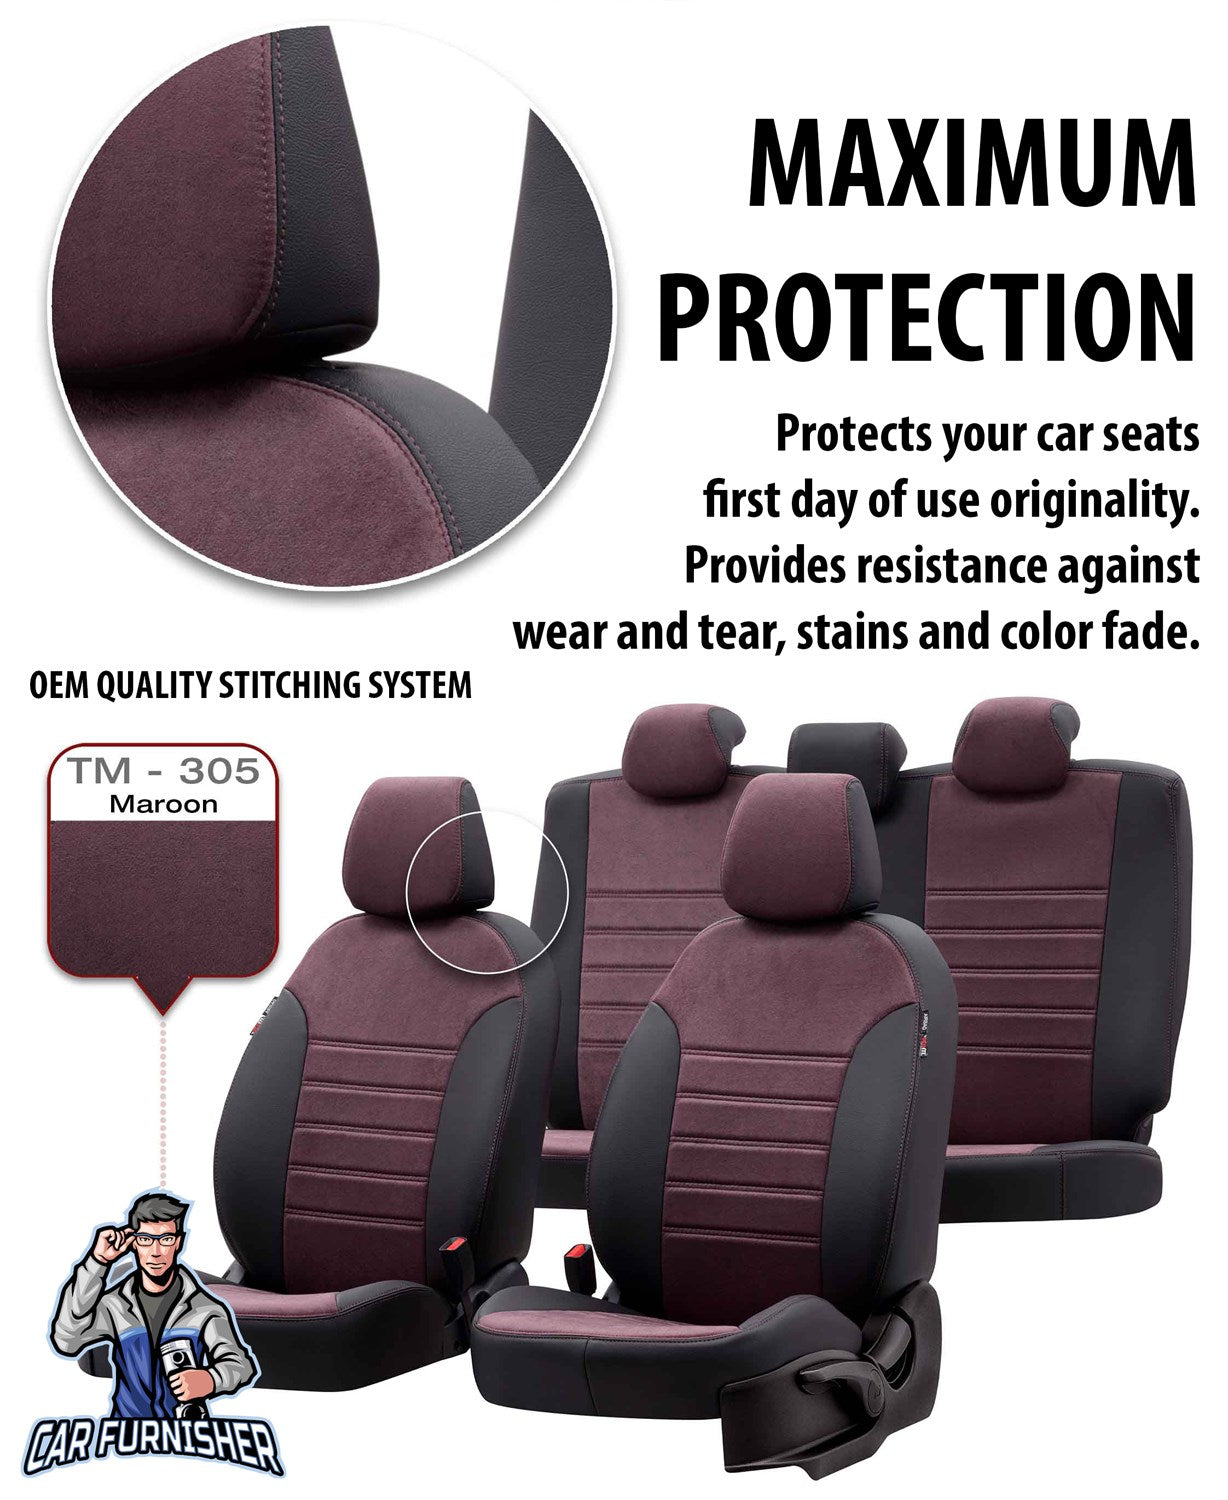 Honda Jazz Seat Covers Milano Suede Design Burgundy Leather & Suede Fabric